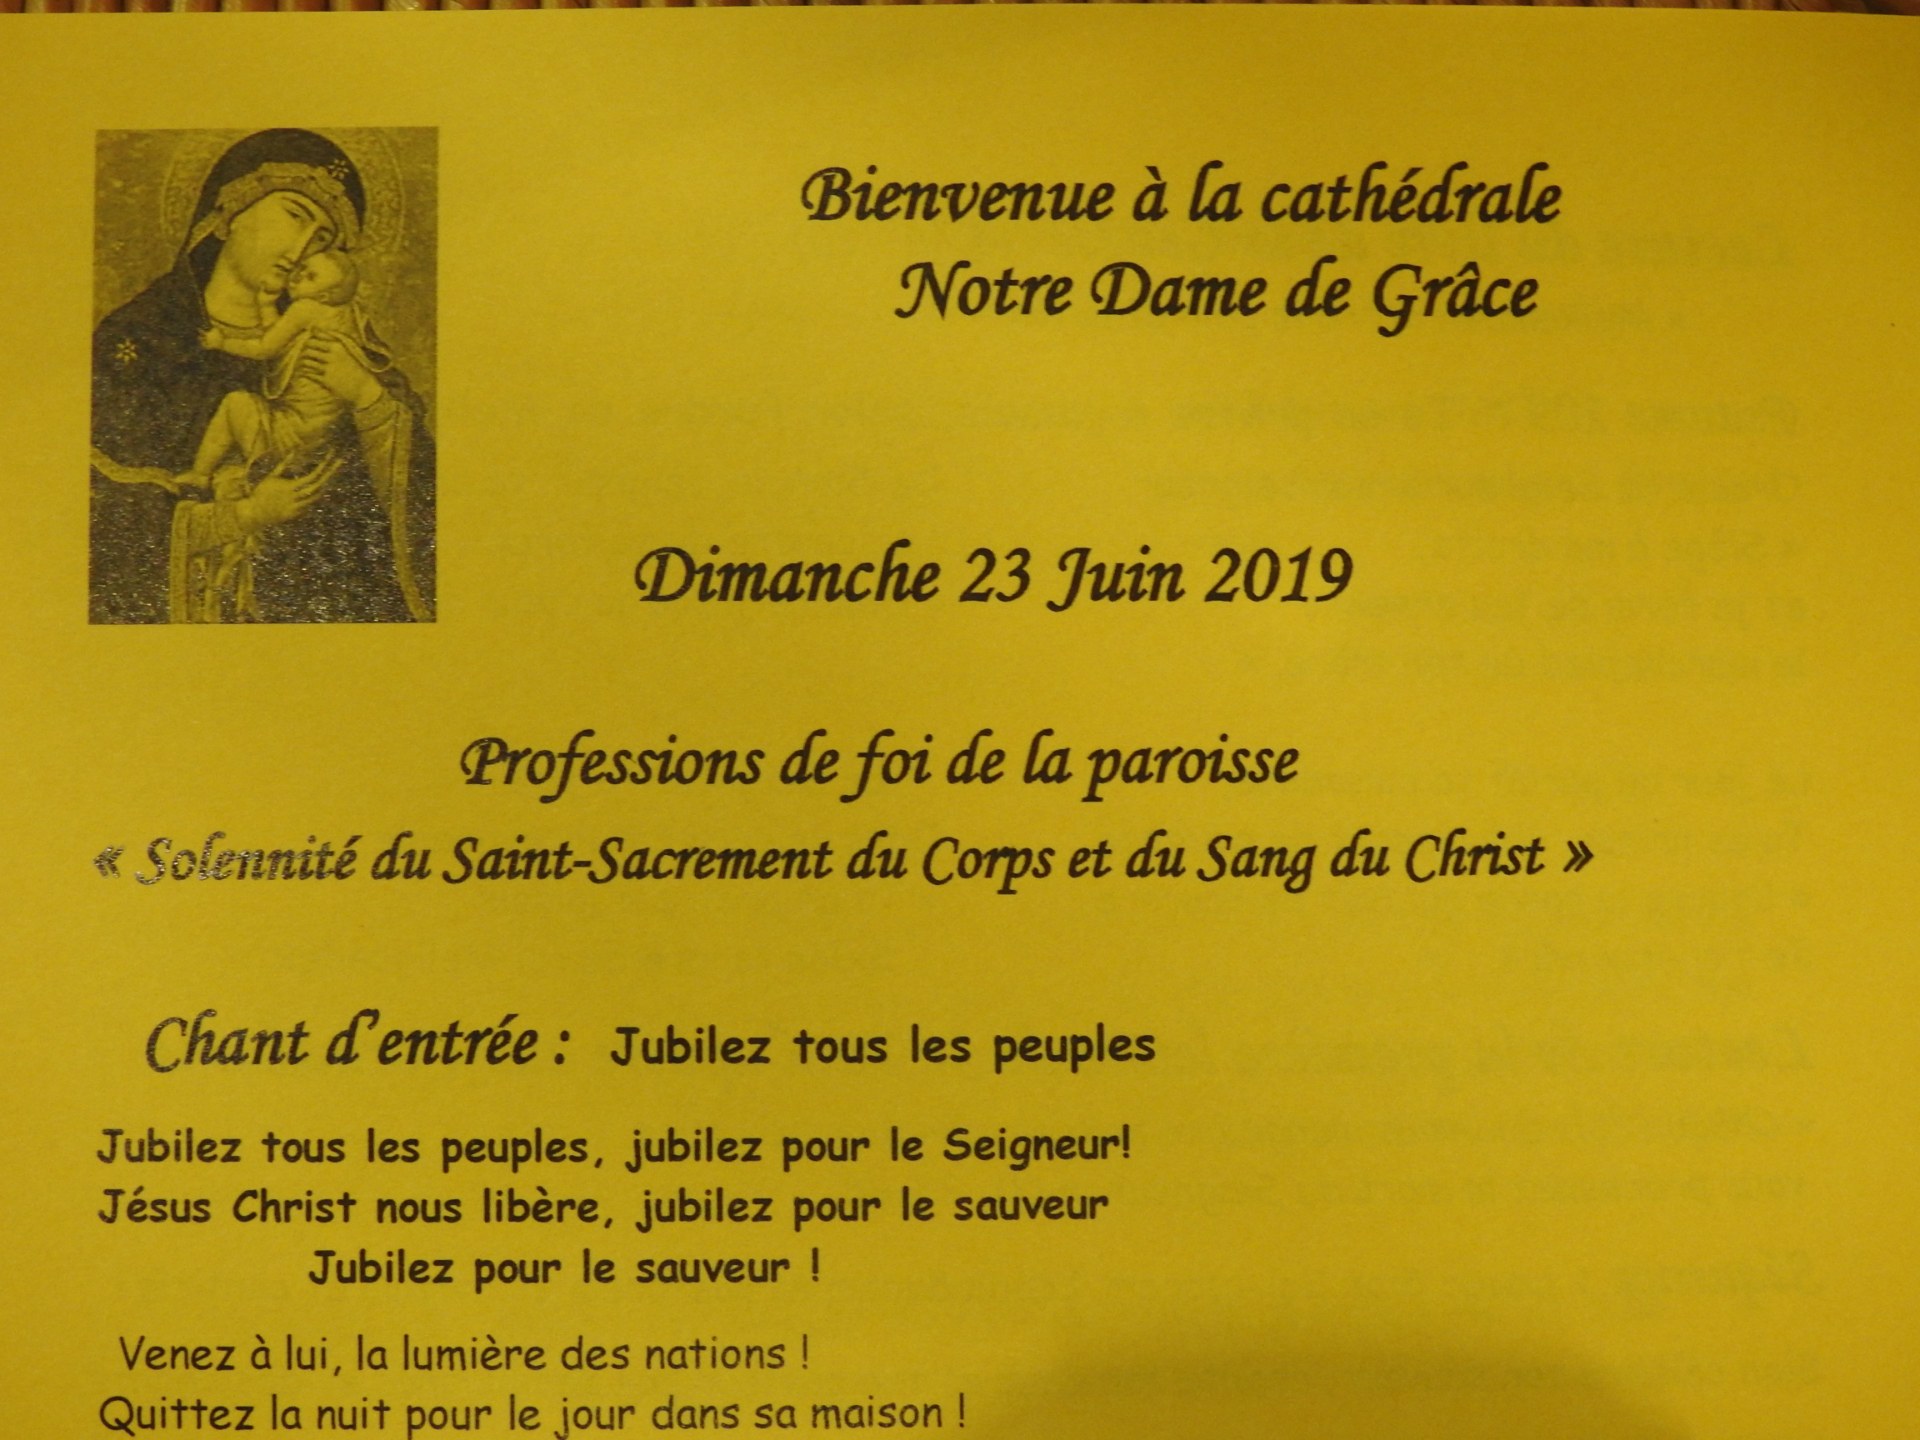 2019-06-23 Prof foi cathedrale (1)